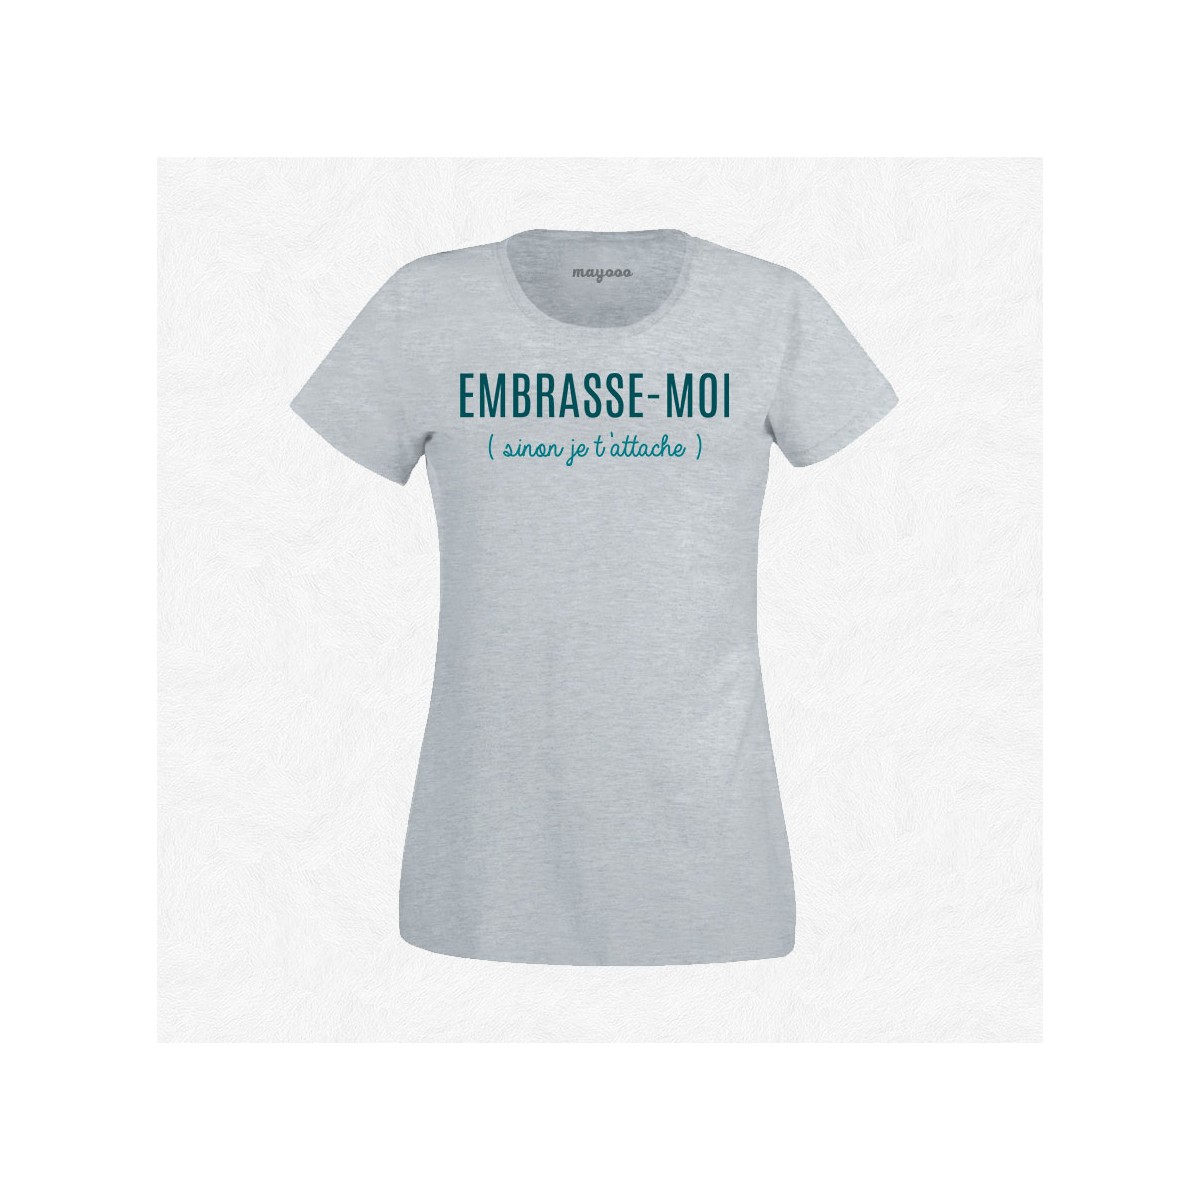 T-shirt Embrasse-moi